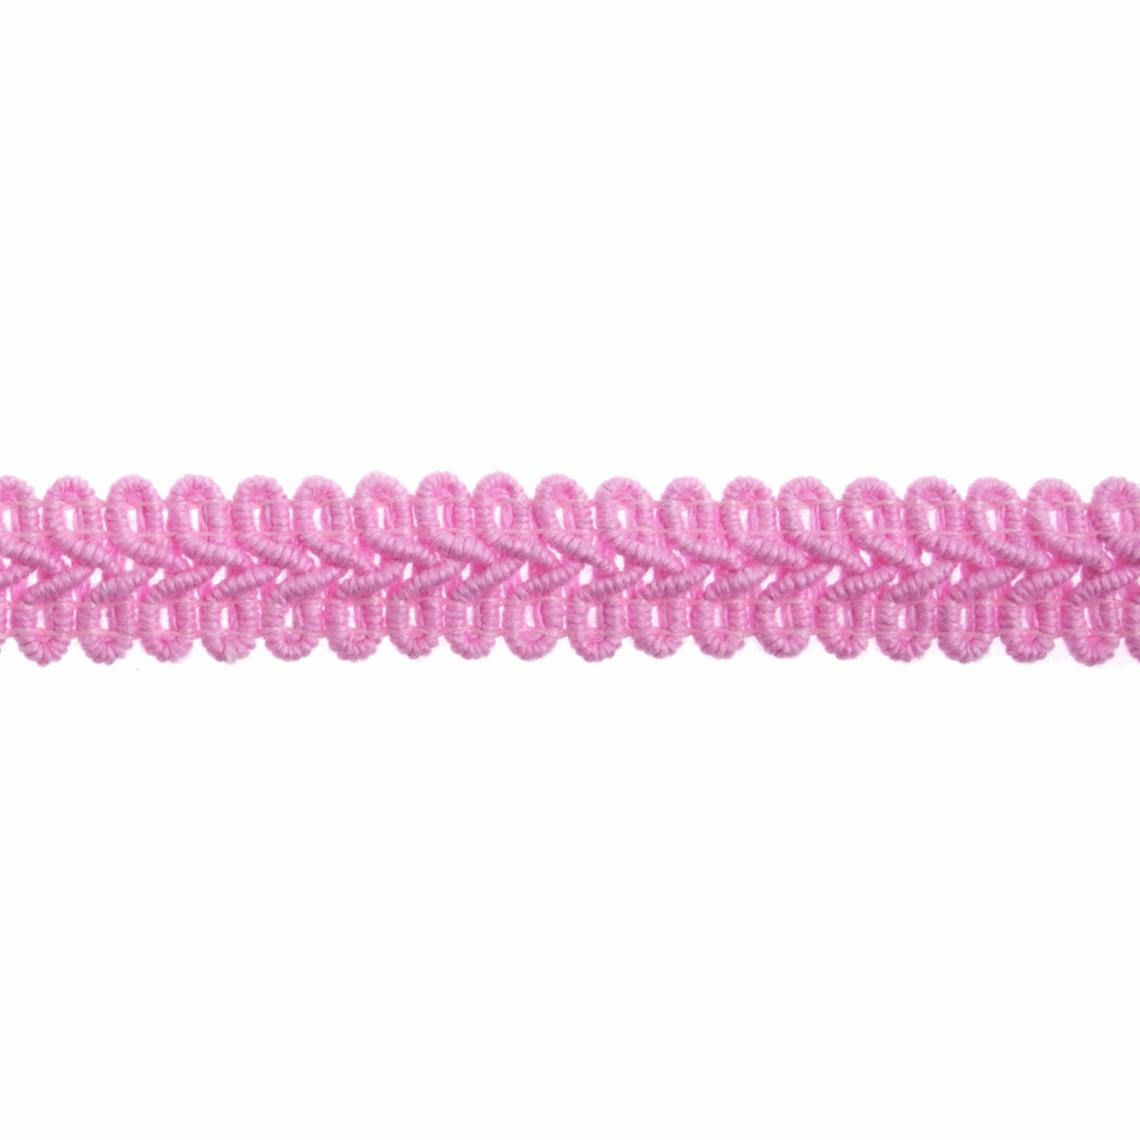 2m x Pink Braid Gimp 15mm Excellent Quality Trimming Metre, Clothes, Funishing, Craft